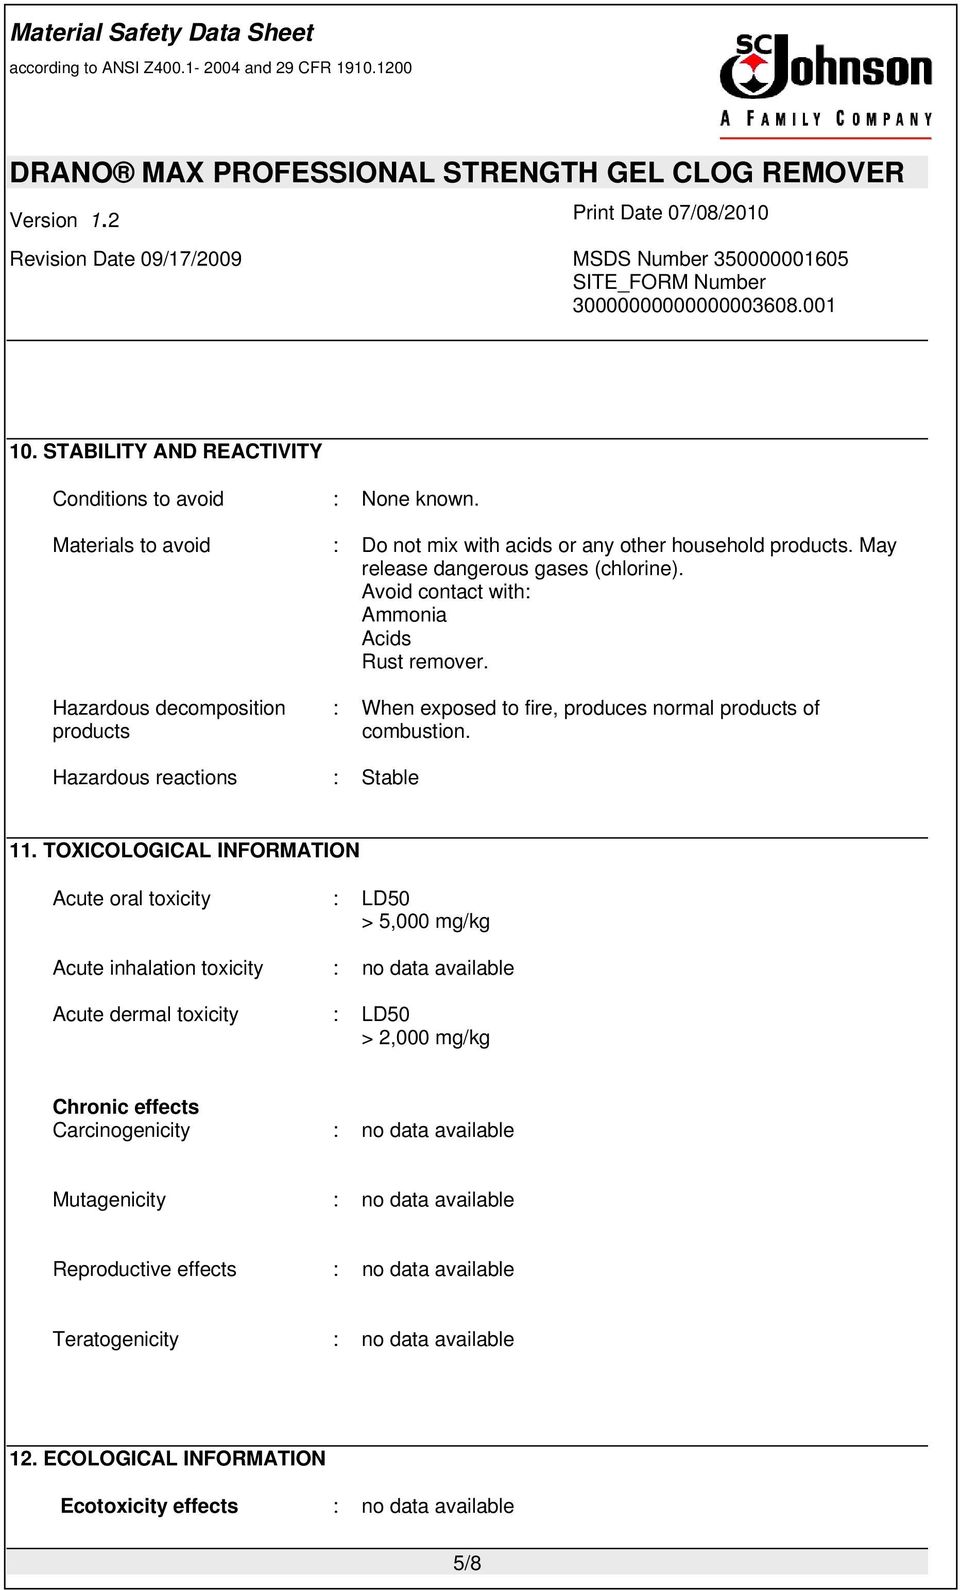 TOXICOLOGICAL INFORMATION Acute oral toxicity : LD50 > 5,000 mg/kg Acute inhalation toxicity : no data available Acute dermal toxicity : LD50 > 2,000 mg/kg Chronic effects